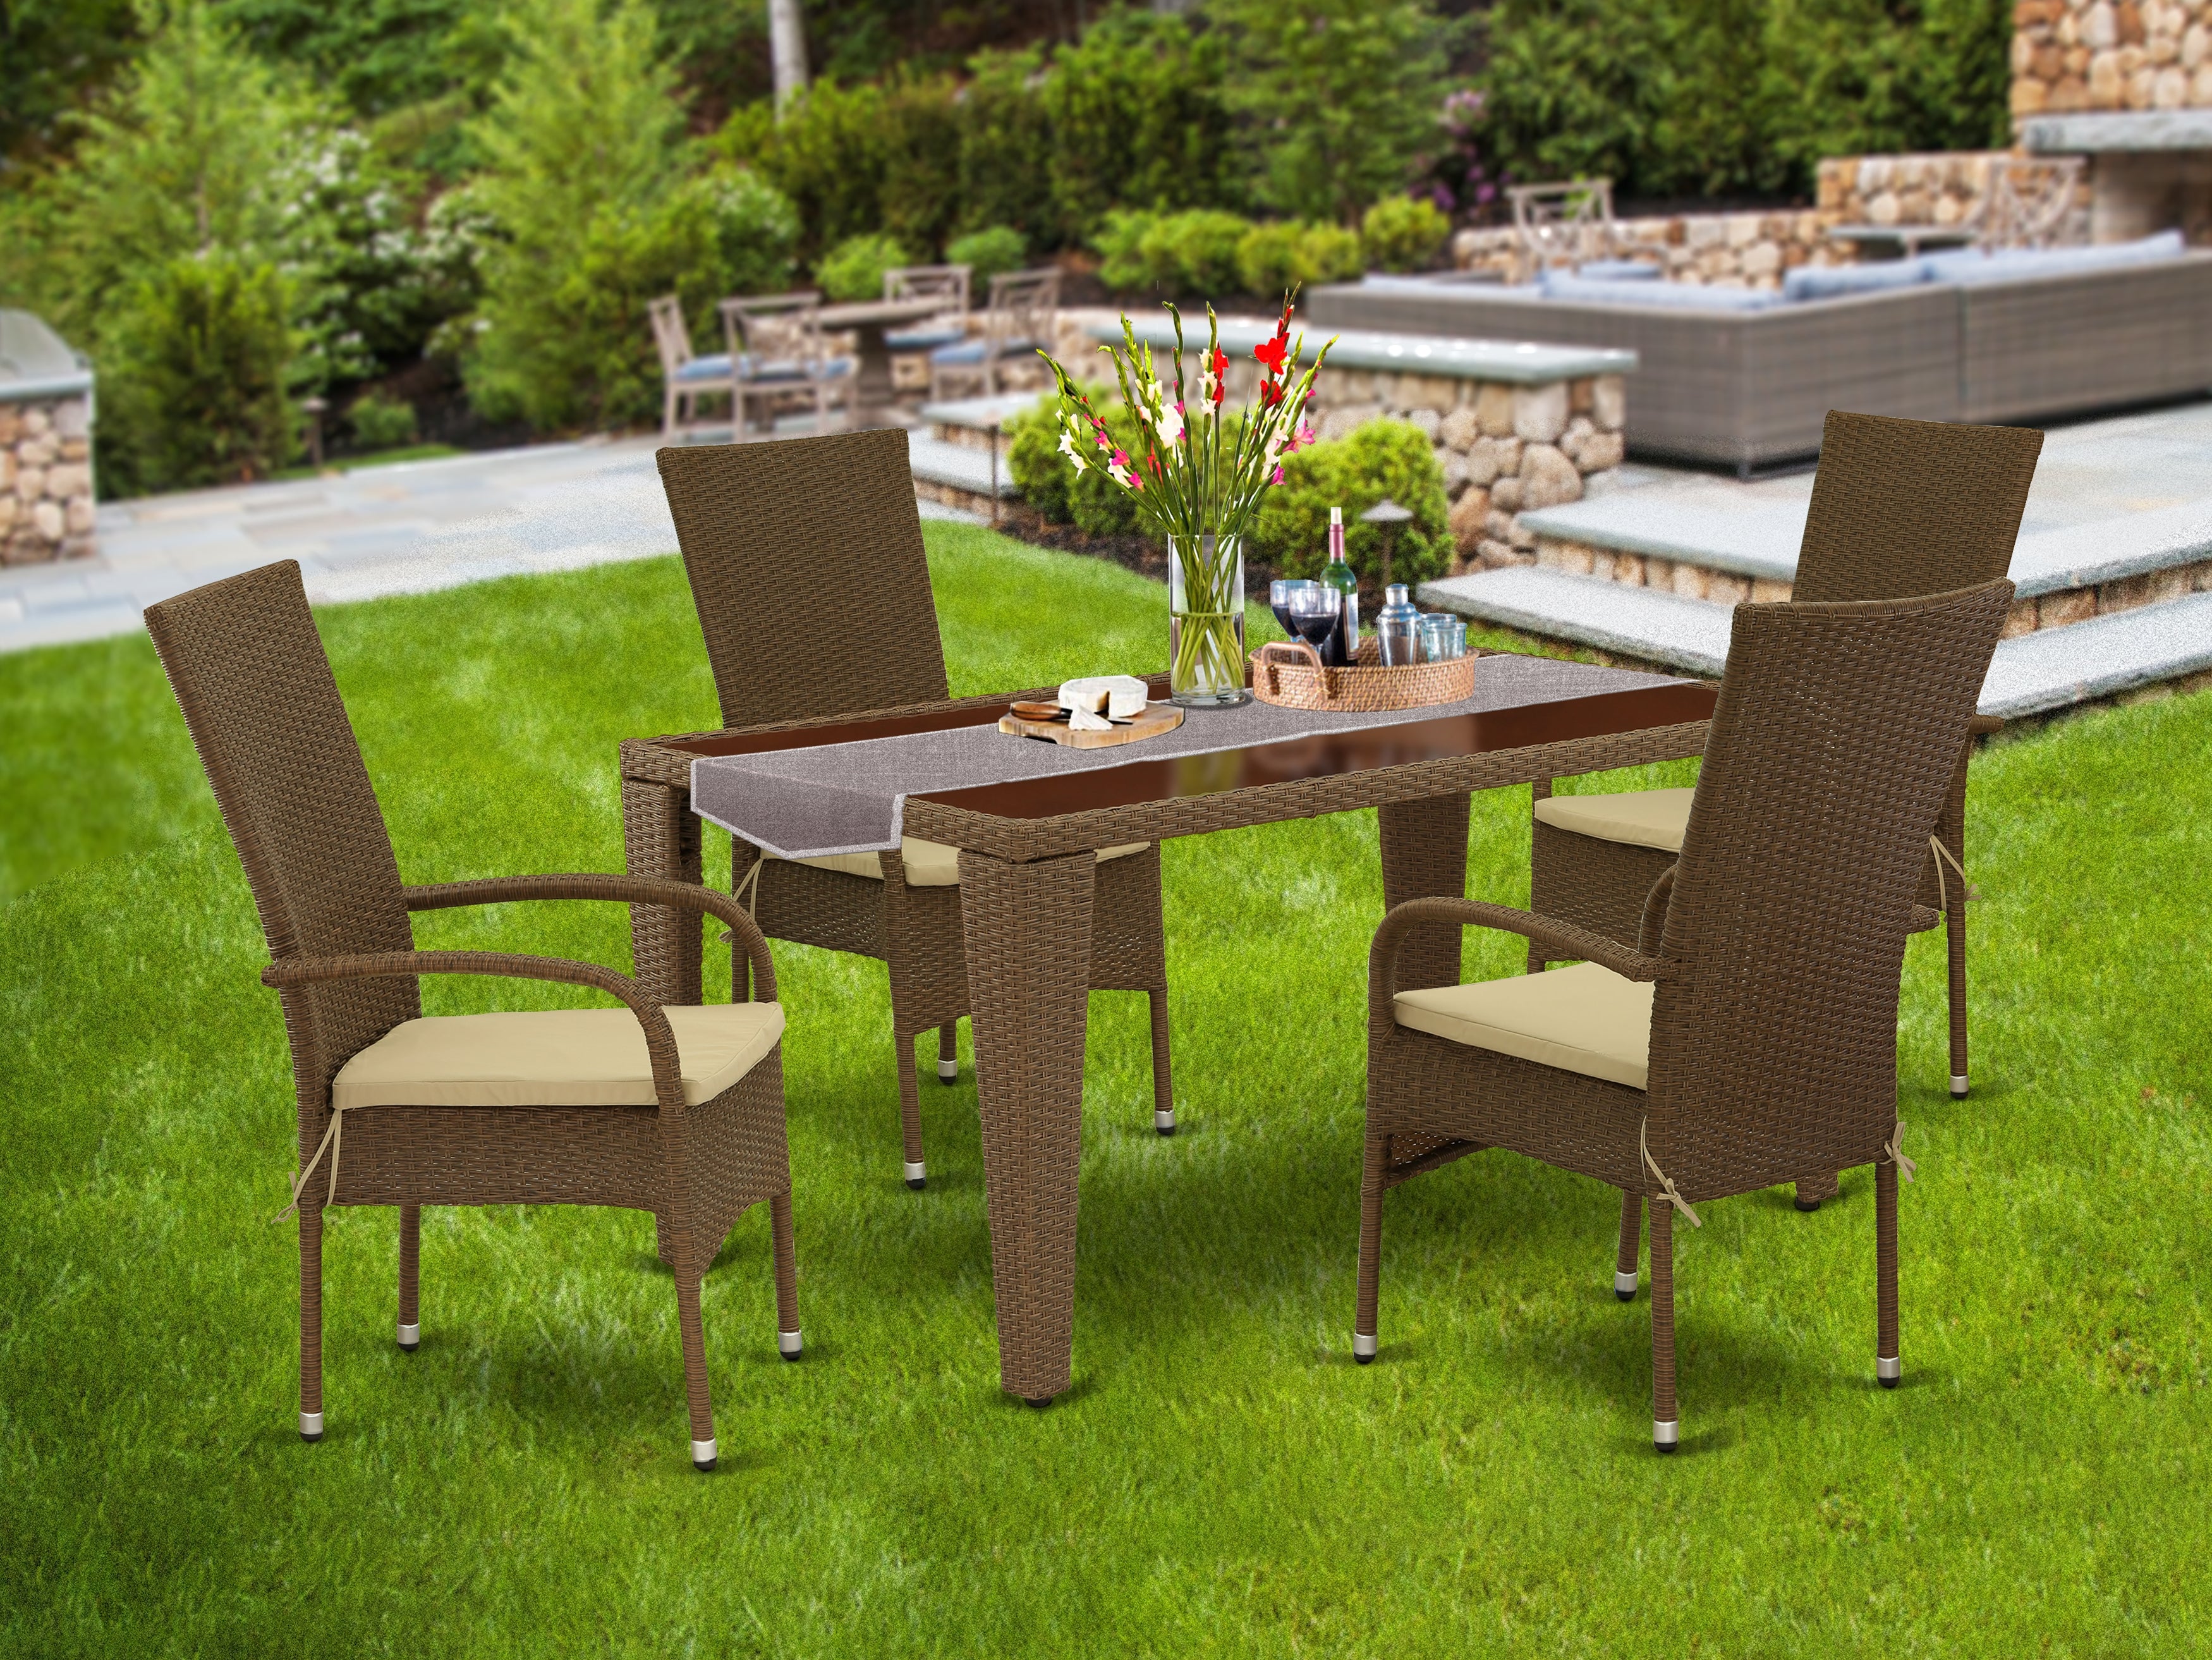 GUOS5-02A 5Pc Outdoor-Furniture Brown Wicker Dining Set Includes a Patio Table and 4 Balcony Backyard Armchair with Linen Fabric Cushion